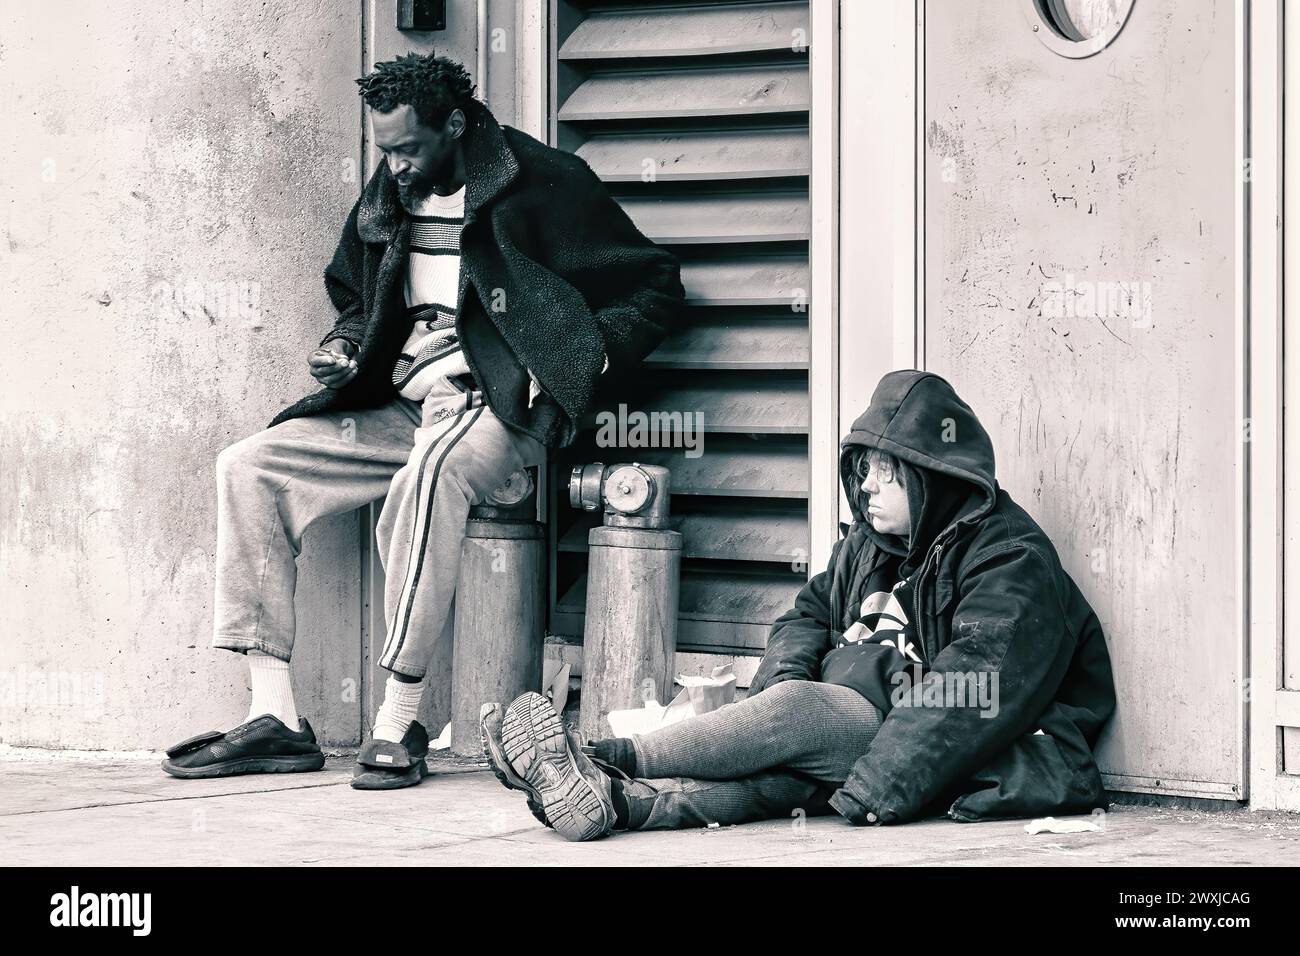 Social issues and poverty in Toronto city, Canada Stock Photo